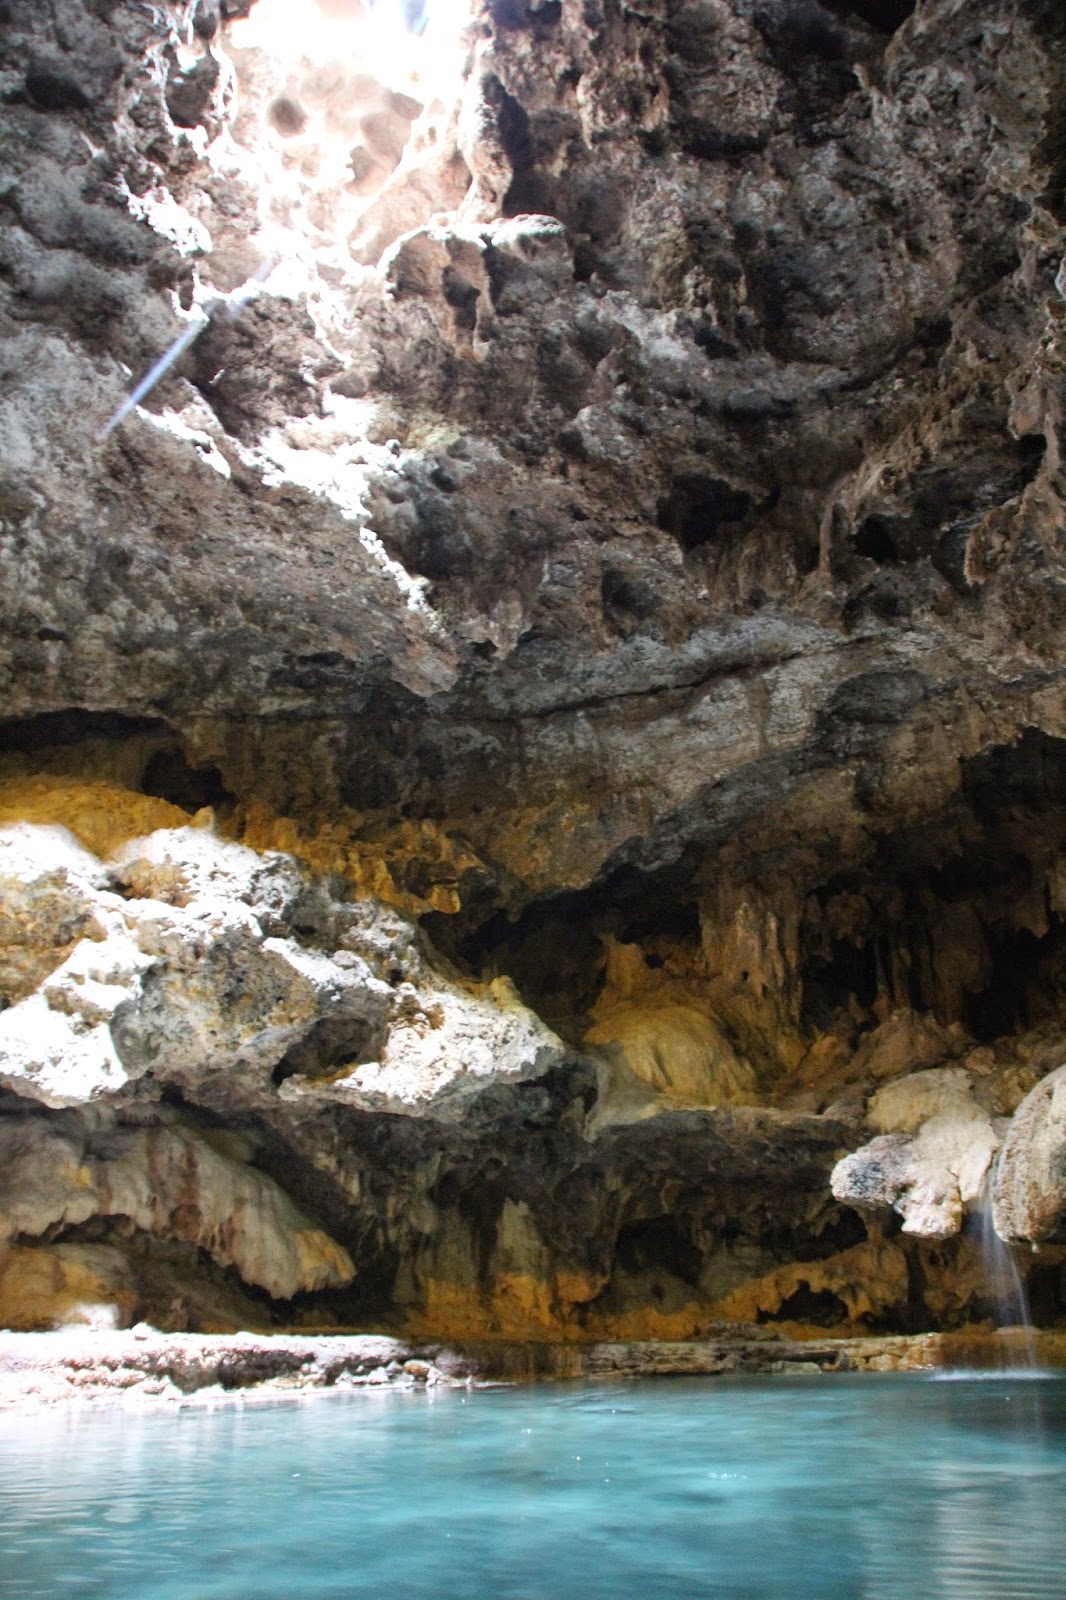 005 – Inside The Cave